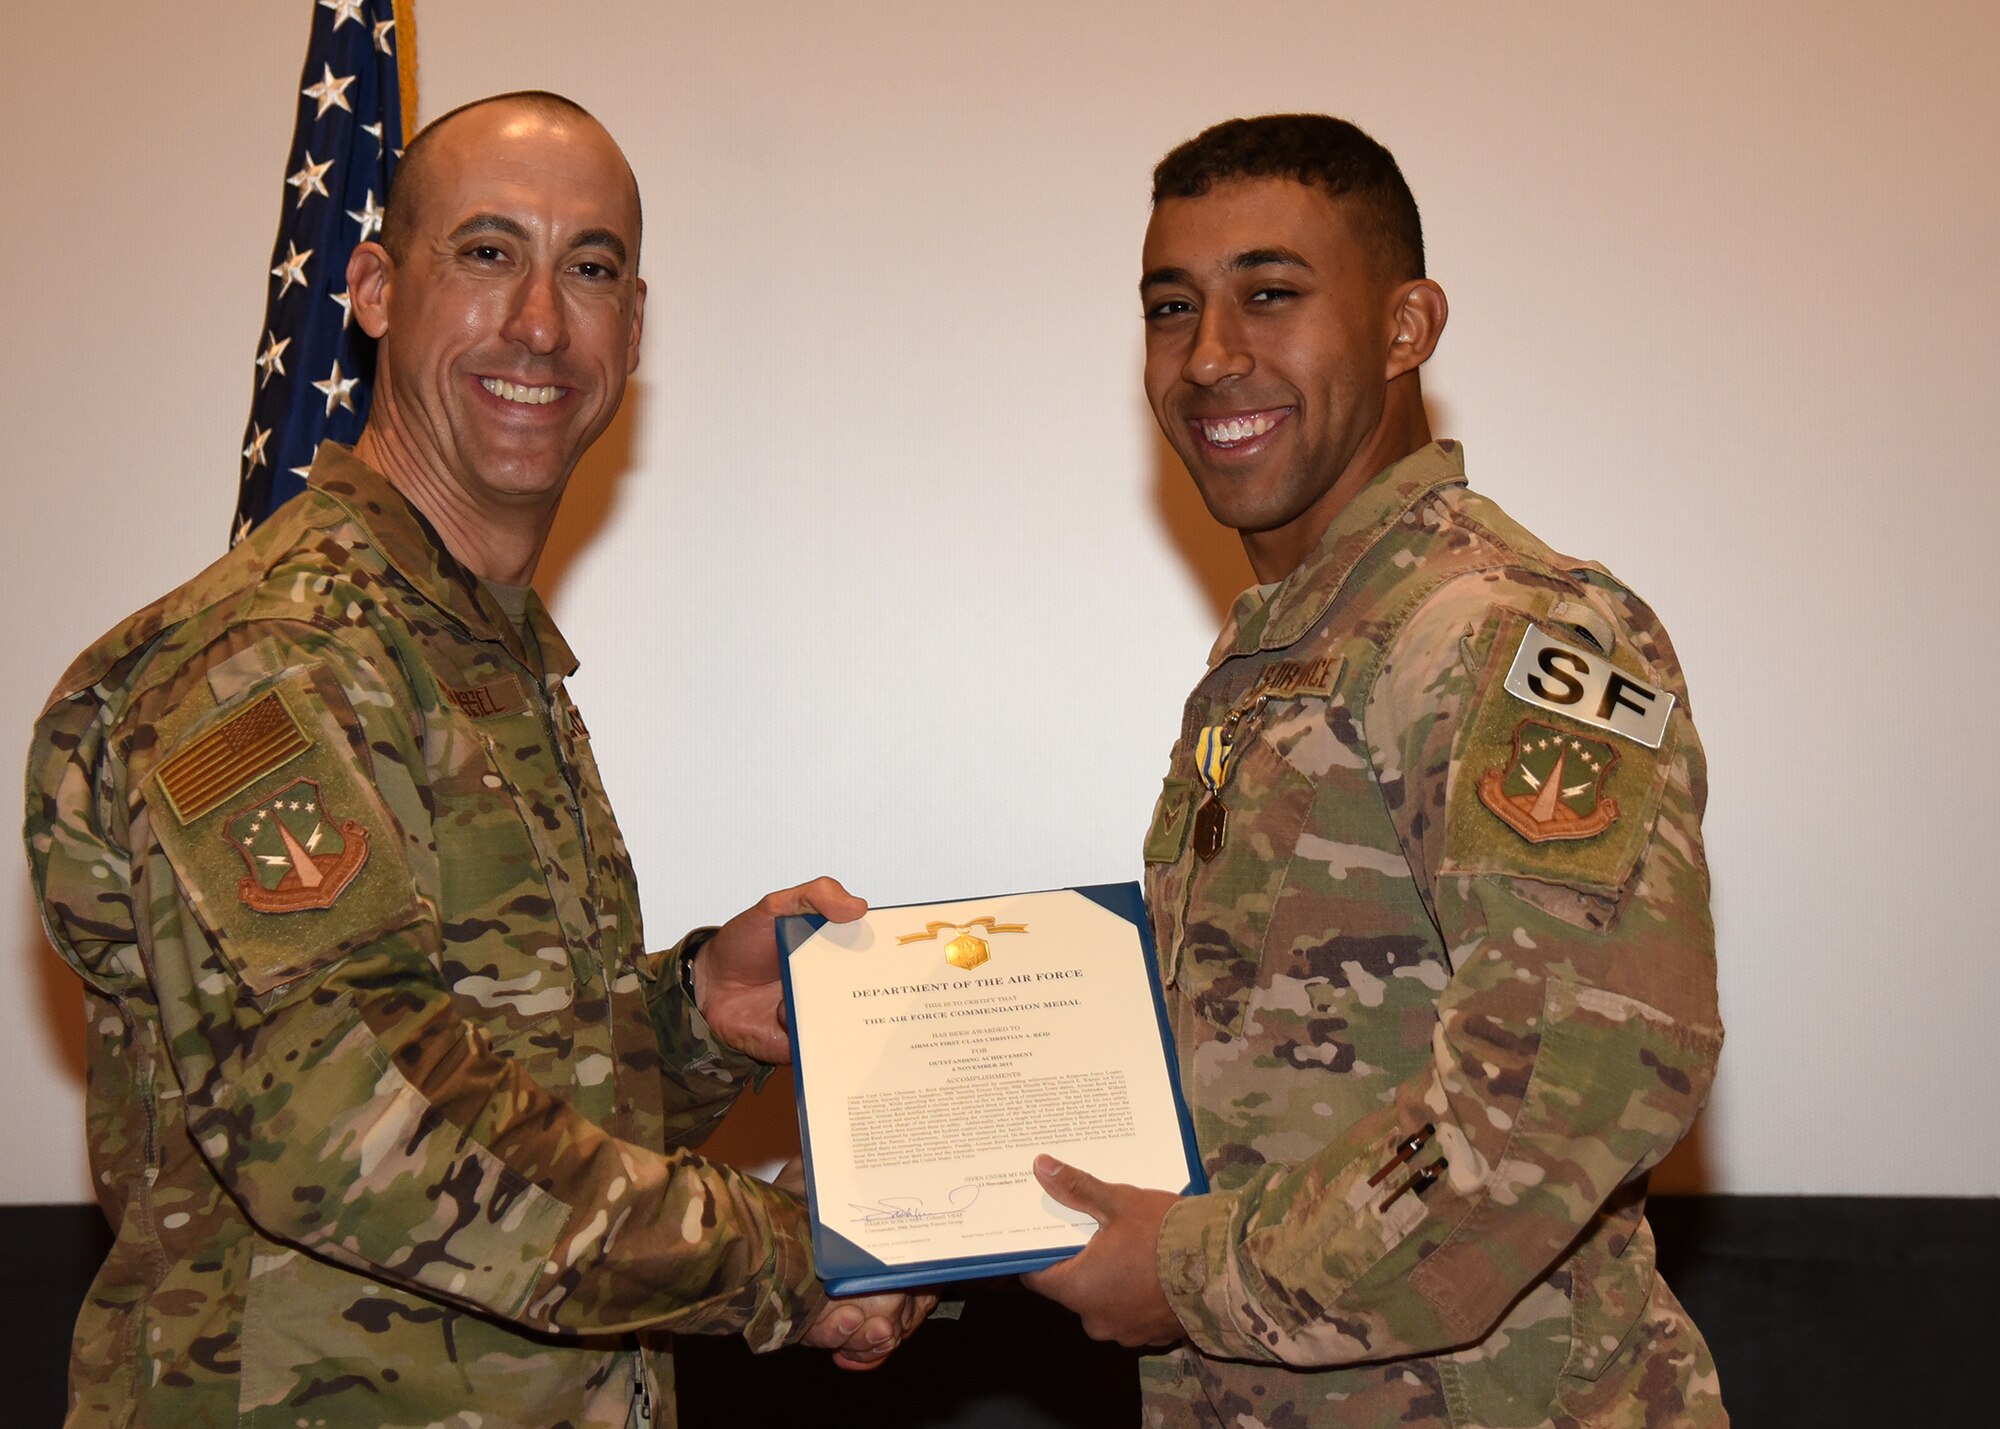 Airman 1st Class Christian Reid, 790th MSFS Defender, receives an Air Force Commendation Award from 90th Security Forces Group Commander Col. Damian Schlussel during a ceremony Nov. 15, 2019, at the Base Theater on F. E. Warren Air Force Base, Wyo. Horton received the commendation for actions taken in rescuing a family in danger of a house fire Nov. 7 in Dix, Nebraska. Reid was recognized alongside his teammate, Airman 1st Class Christopher Horton. (Air Force photo by Glenn S. Robertson)